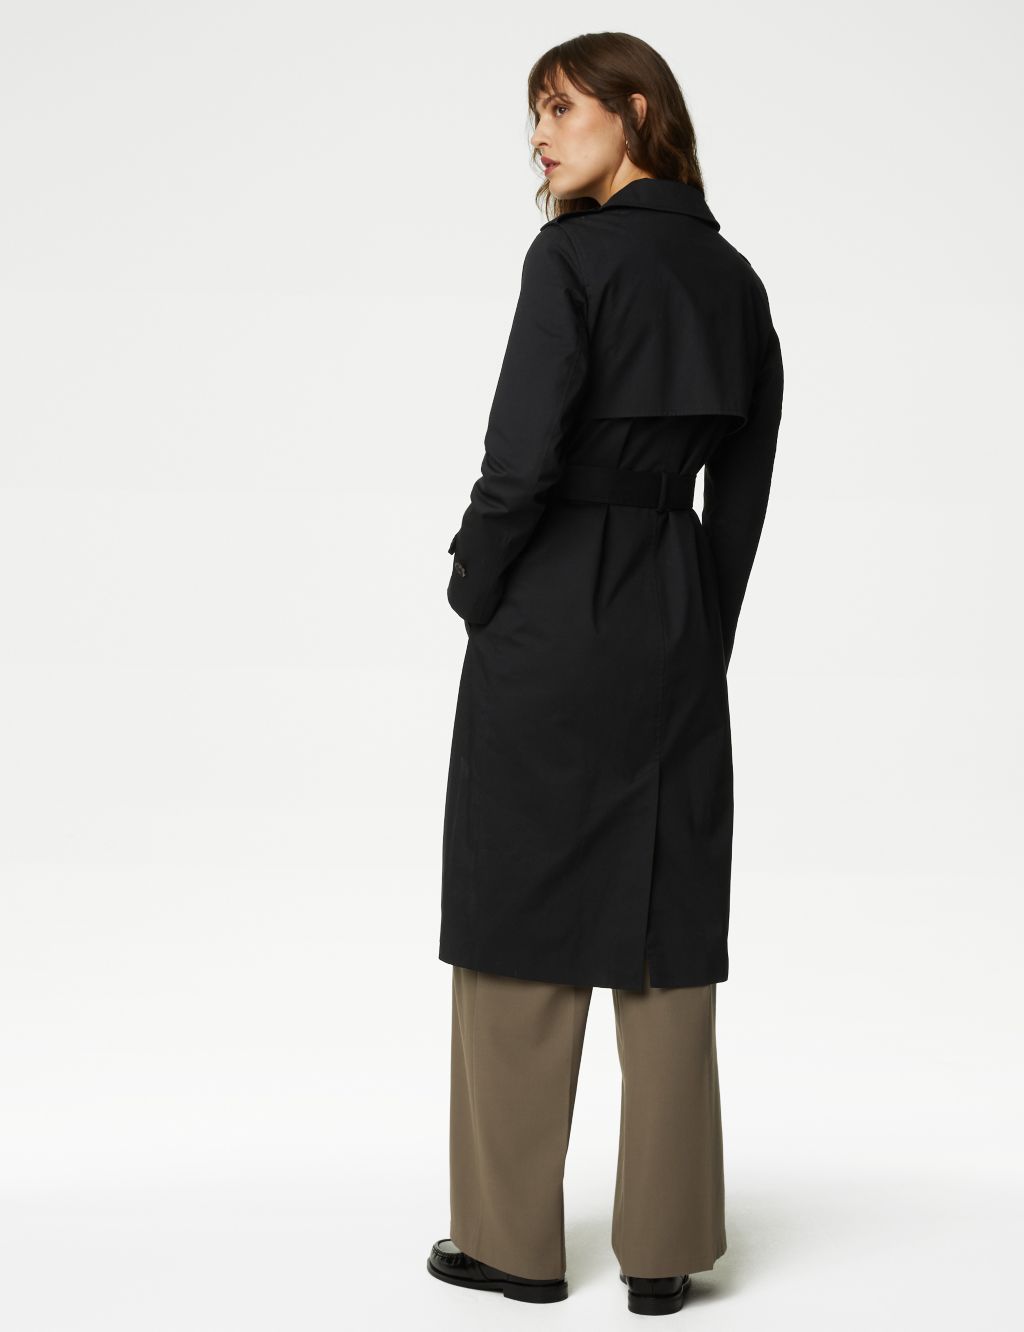 Petite Cotton Rich Double Breasted Trench Coat image 5